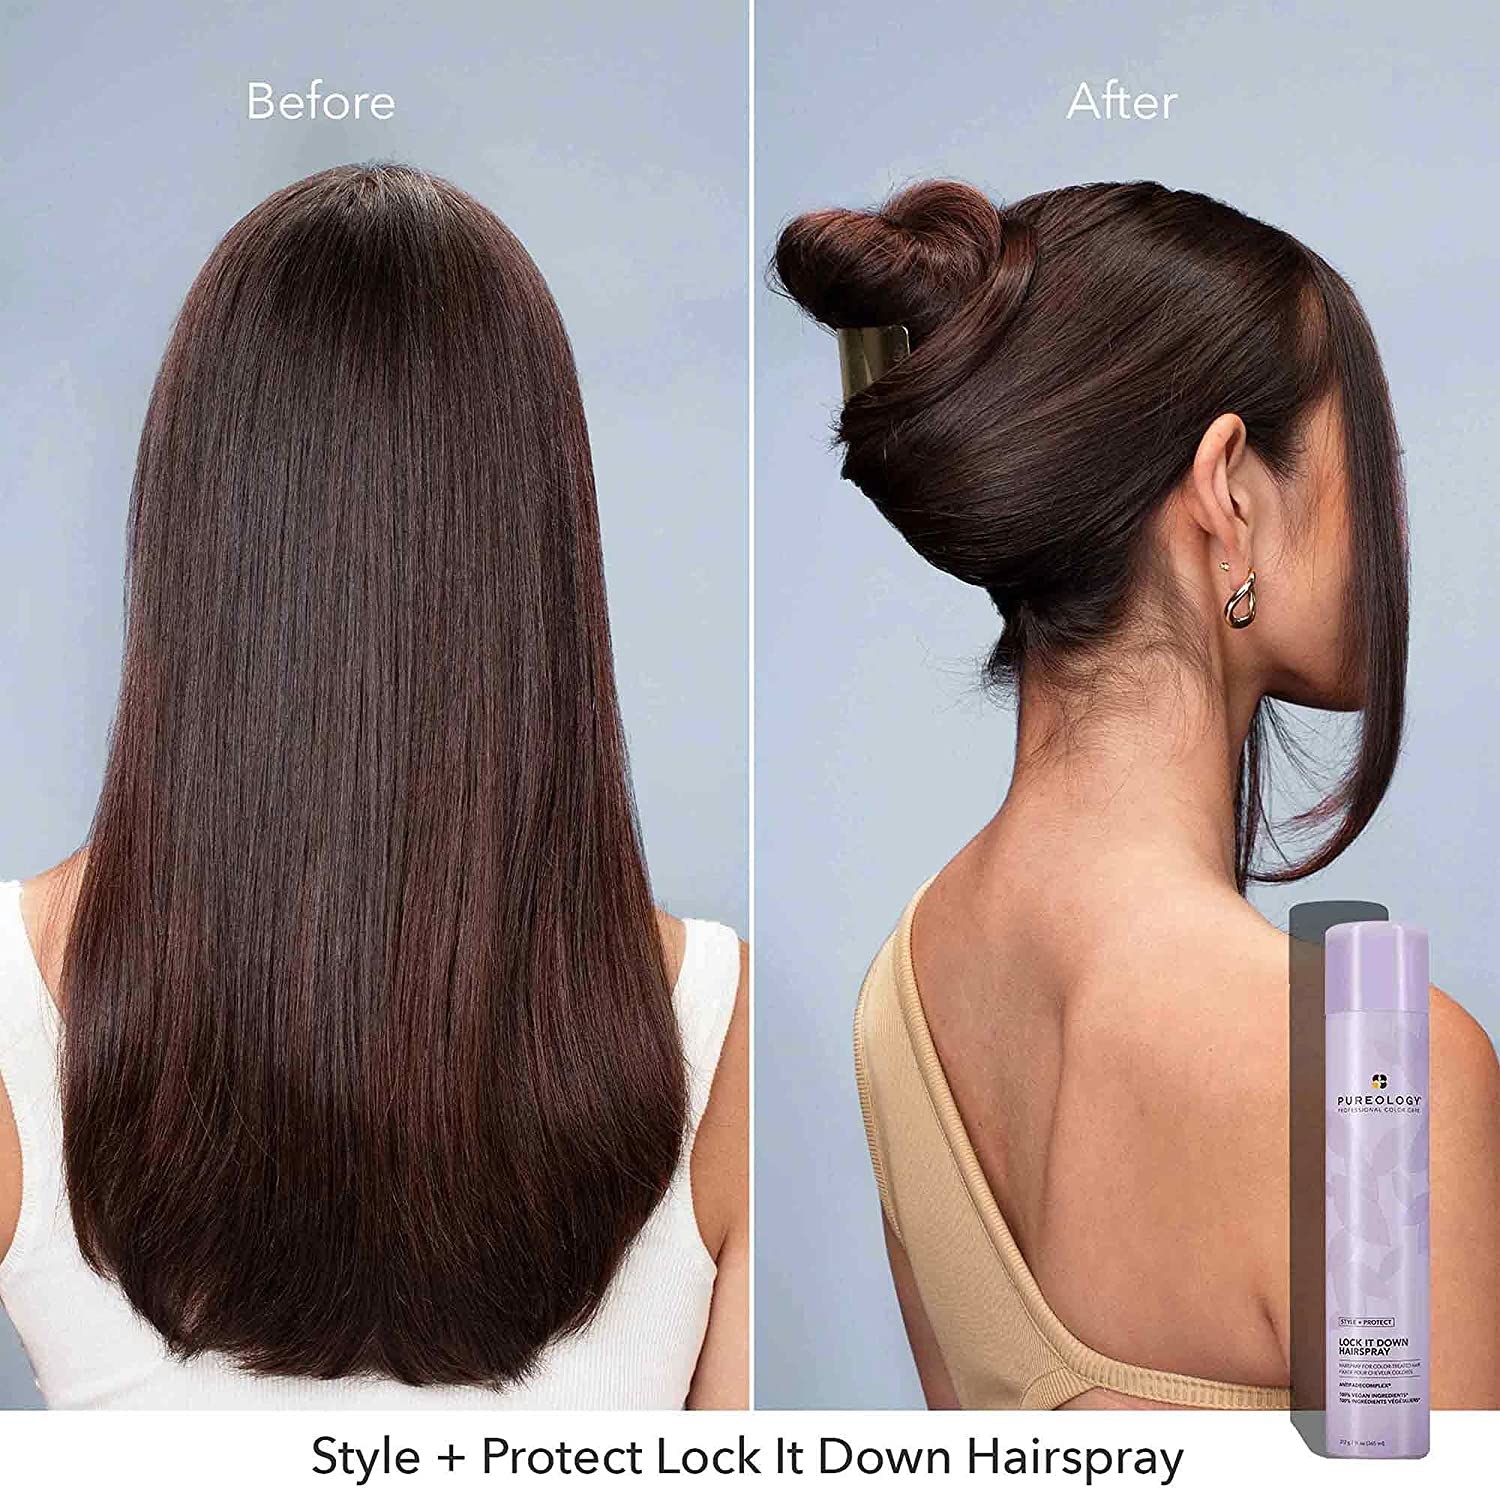 A before and after image of a person&#x27;s hair wit using hairspray